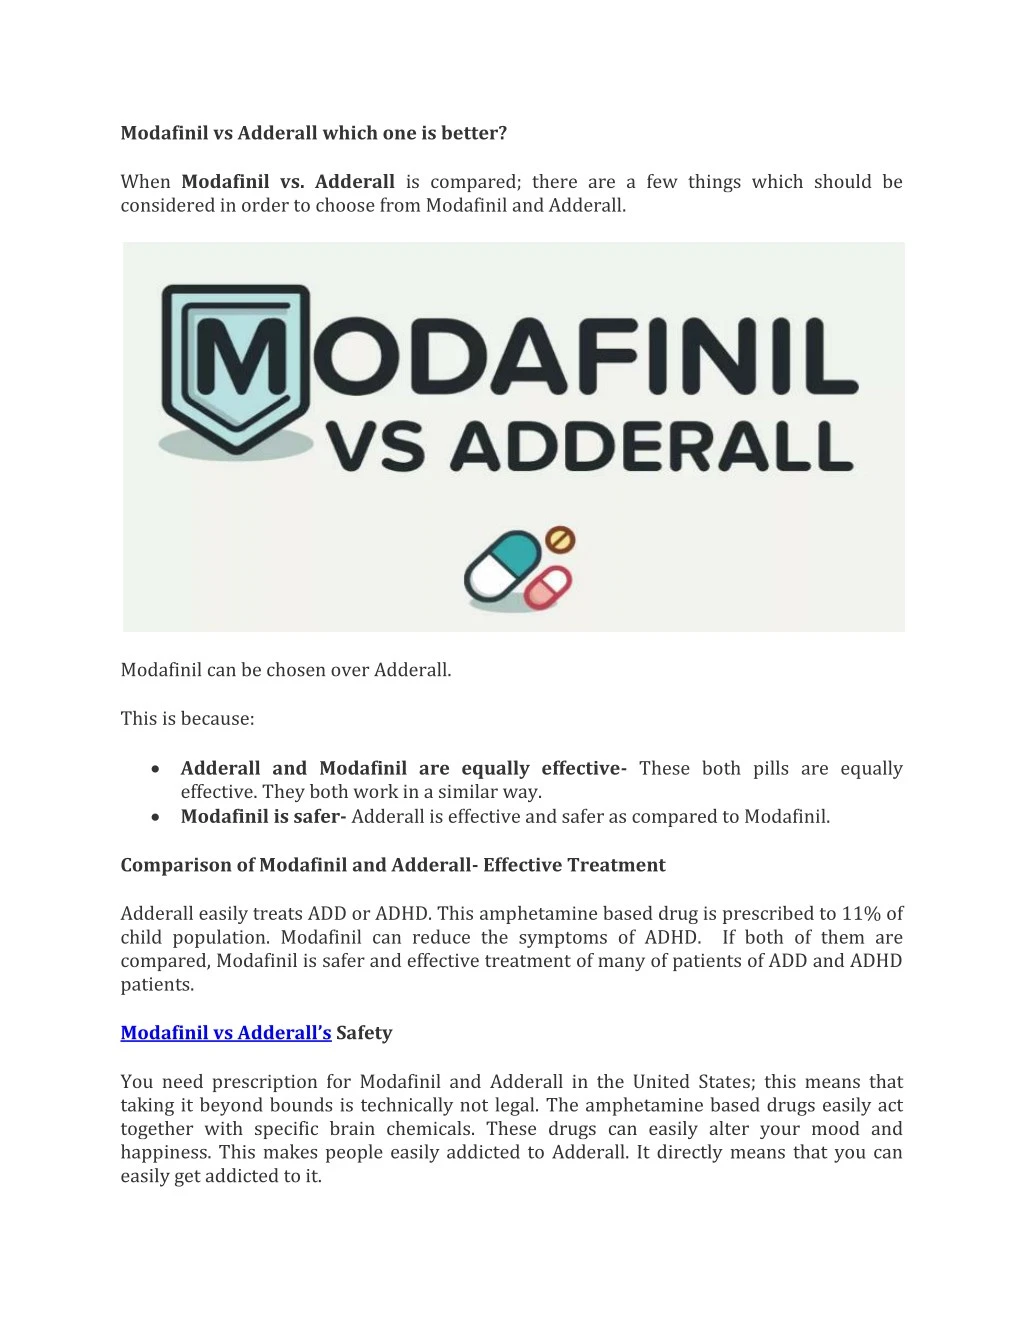 modafinil vs adderall which one is better